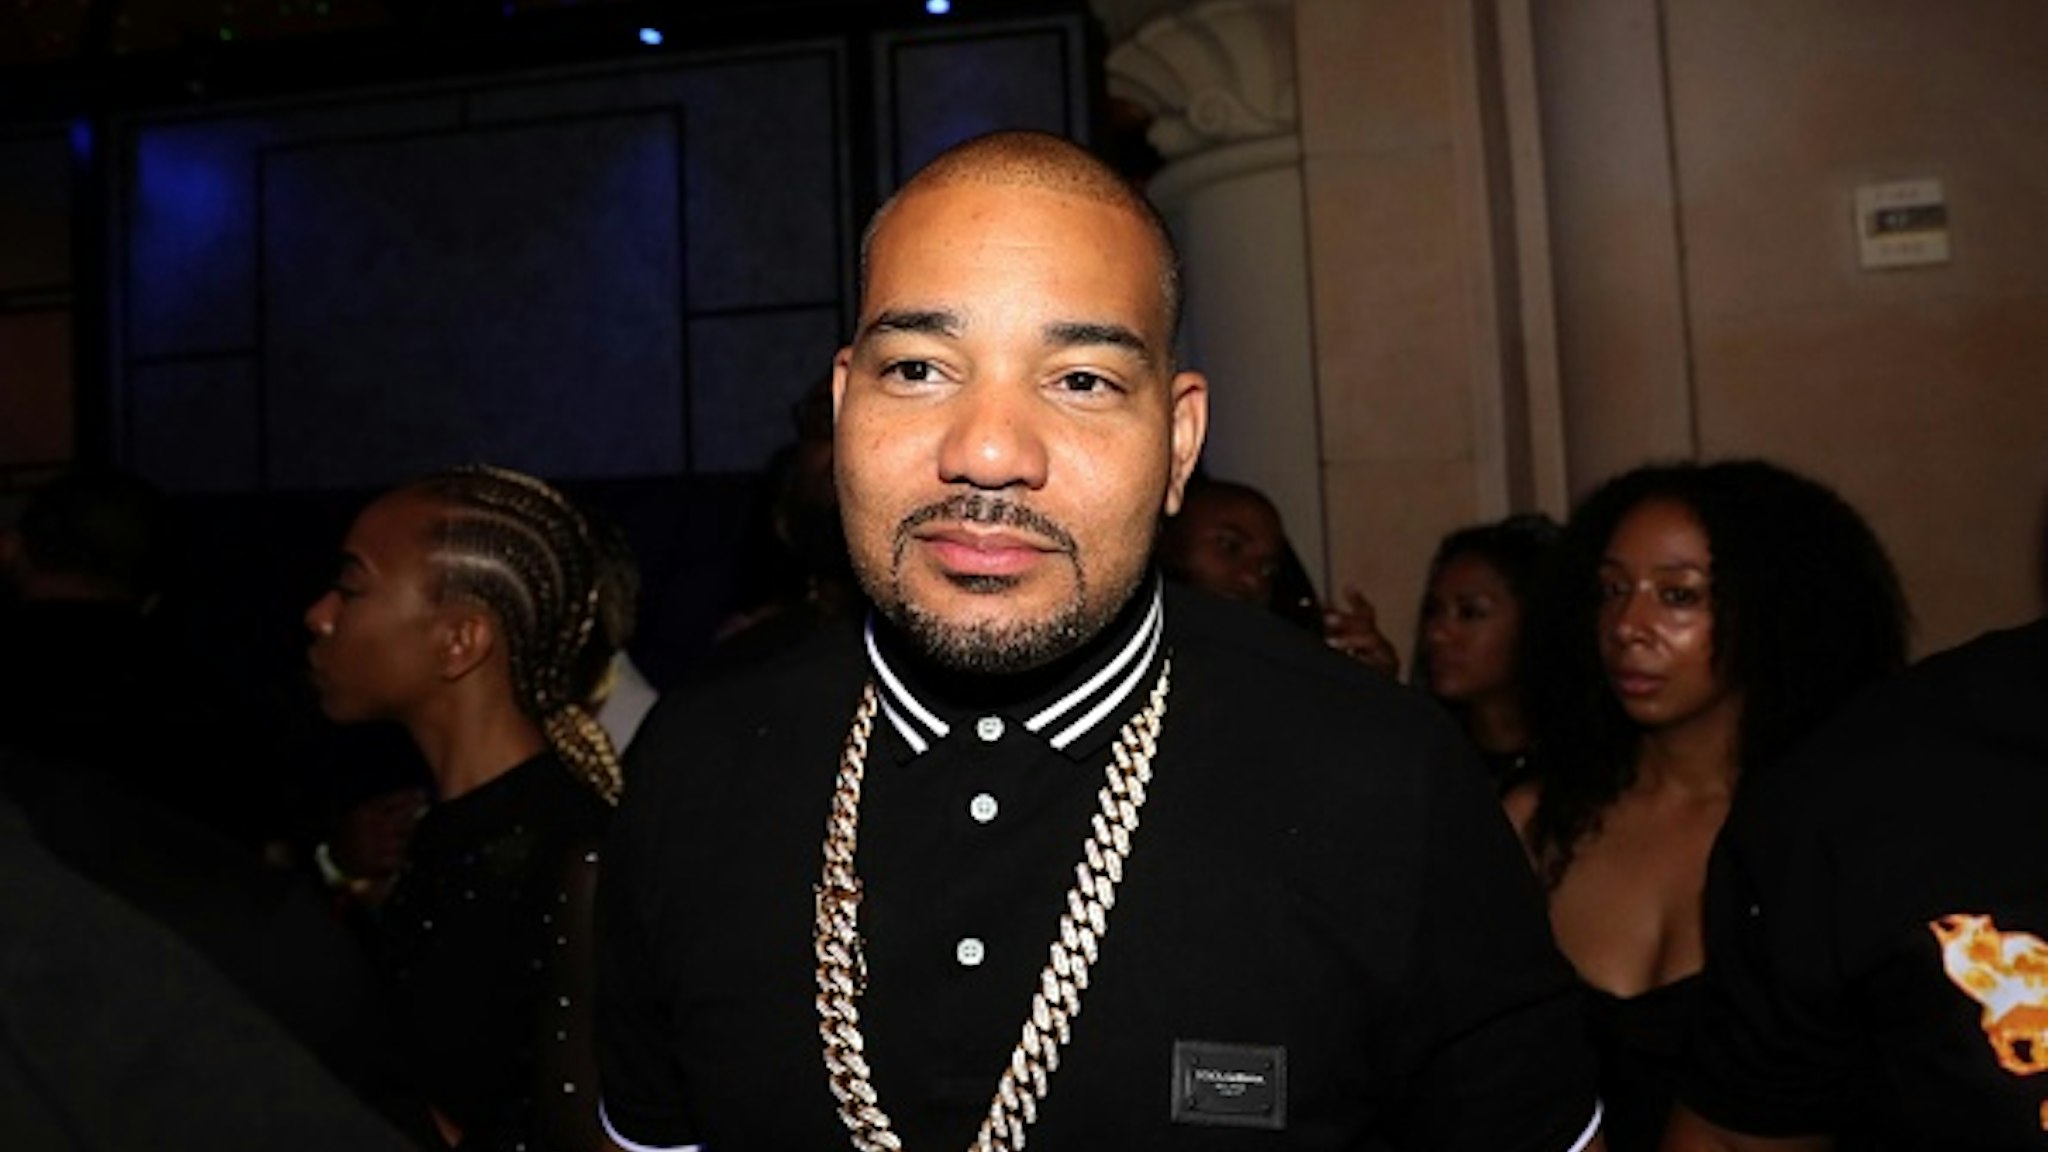 NEW ORLEANS, LA - JULY 07: DJ Envy attends the All Black Affair Hosted By Nas at Metropolitan Nightclub on July 7, 2019 in New Orleans, Louisiana.